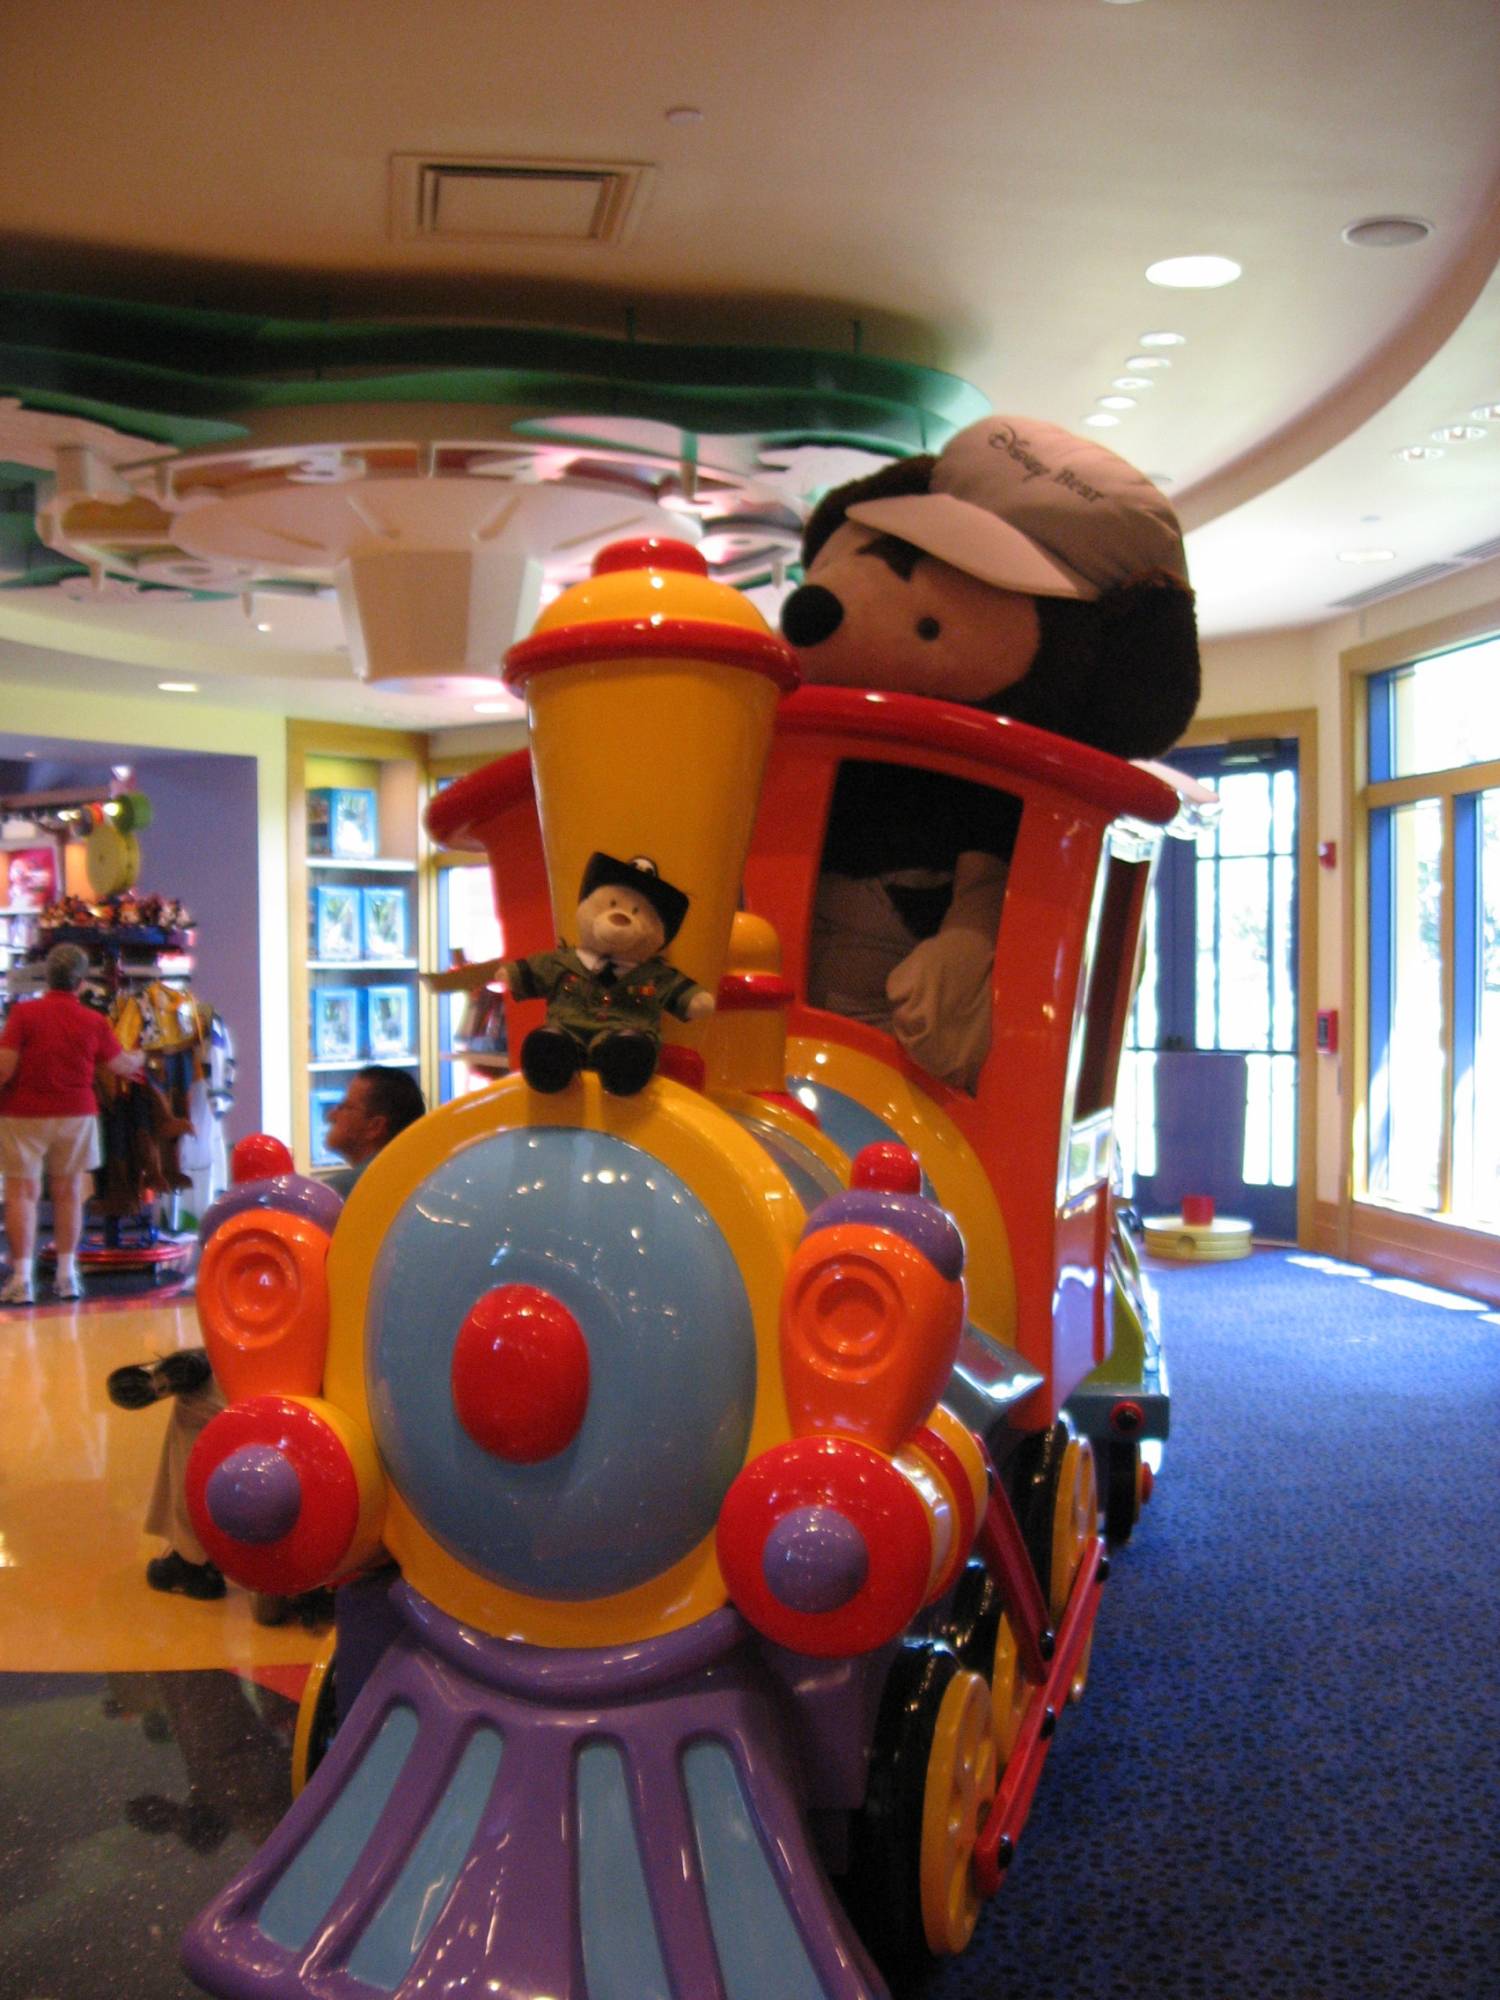 Downtown Disney - Once Upon a Toy